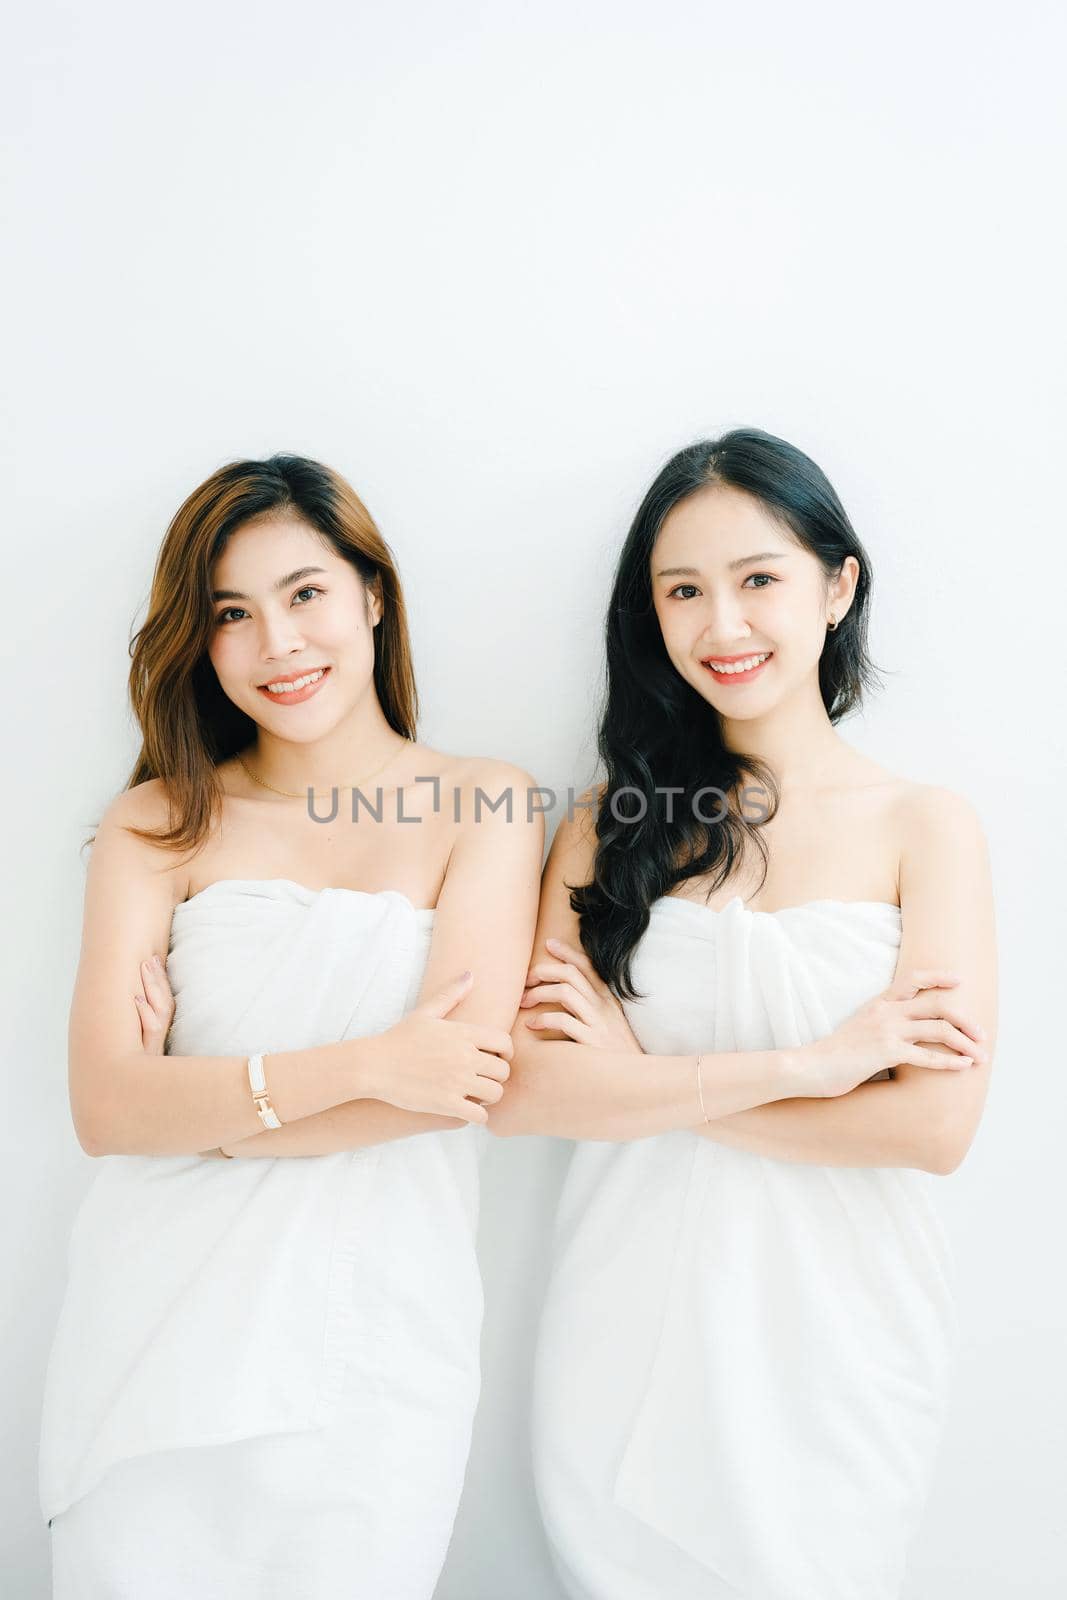 lgbtq, LGBT concept, homosexuality, portrait of two Asian women posing happy together and showing love for each other while taking a shower.